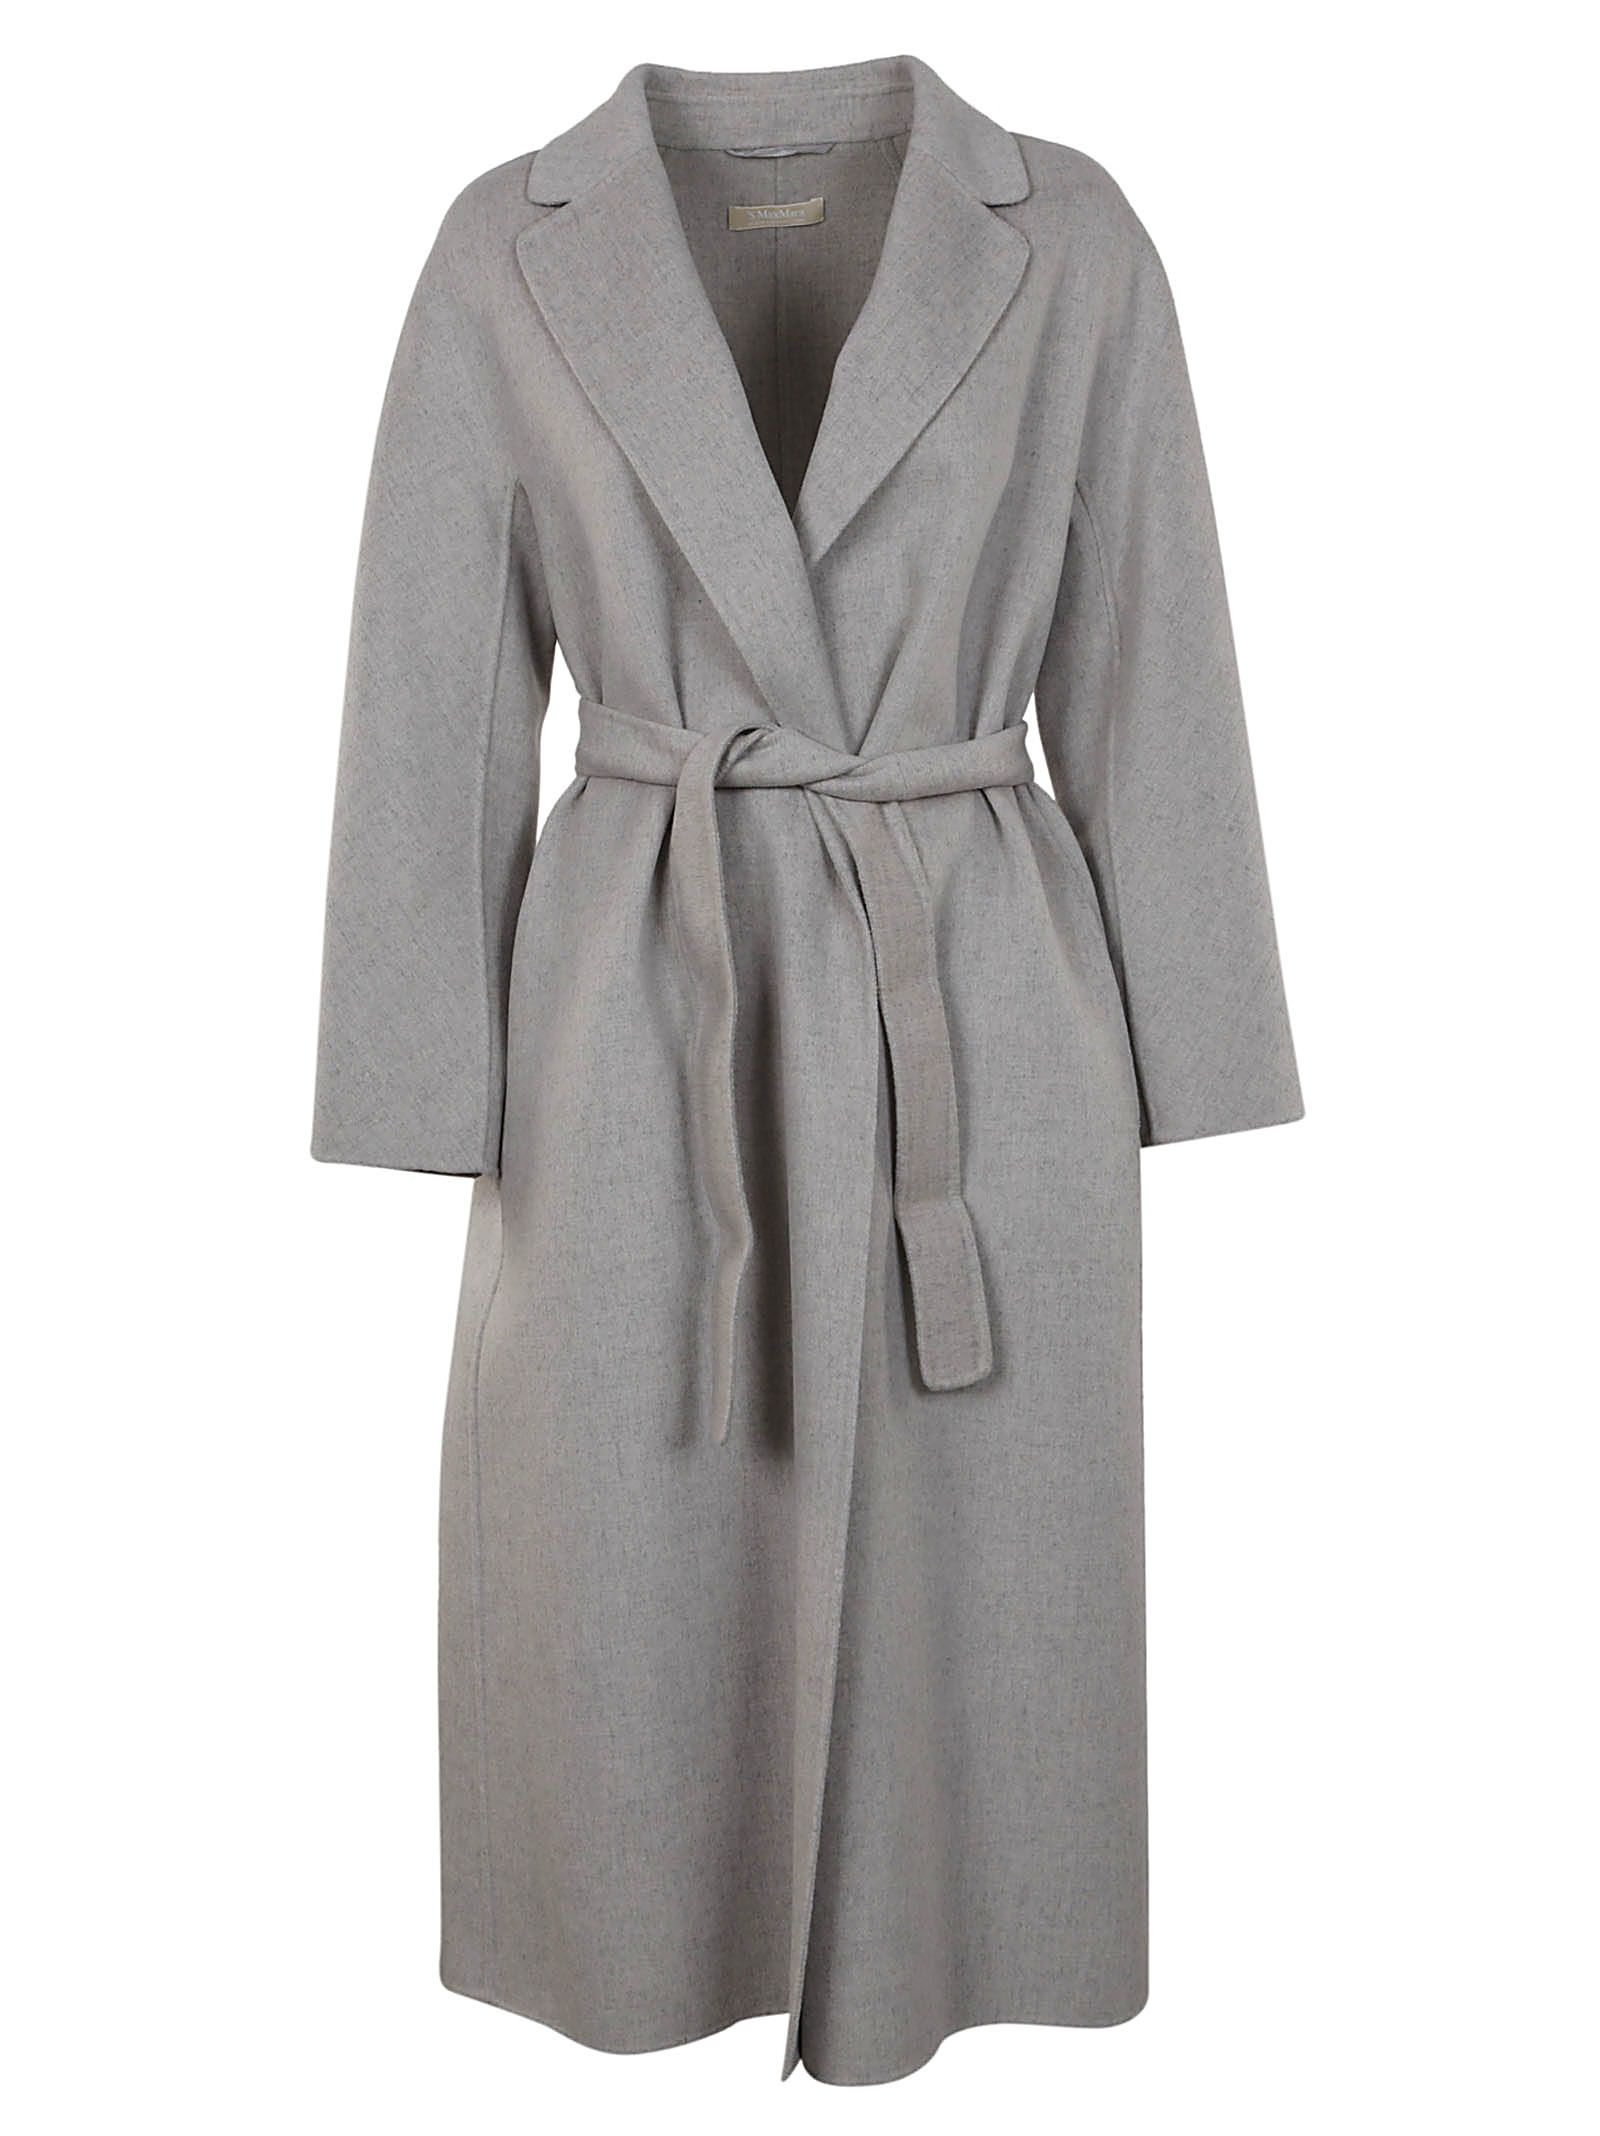 Awesome! Best price in the market for Max Mara Esturia Coat